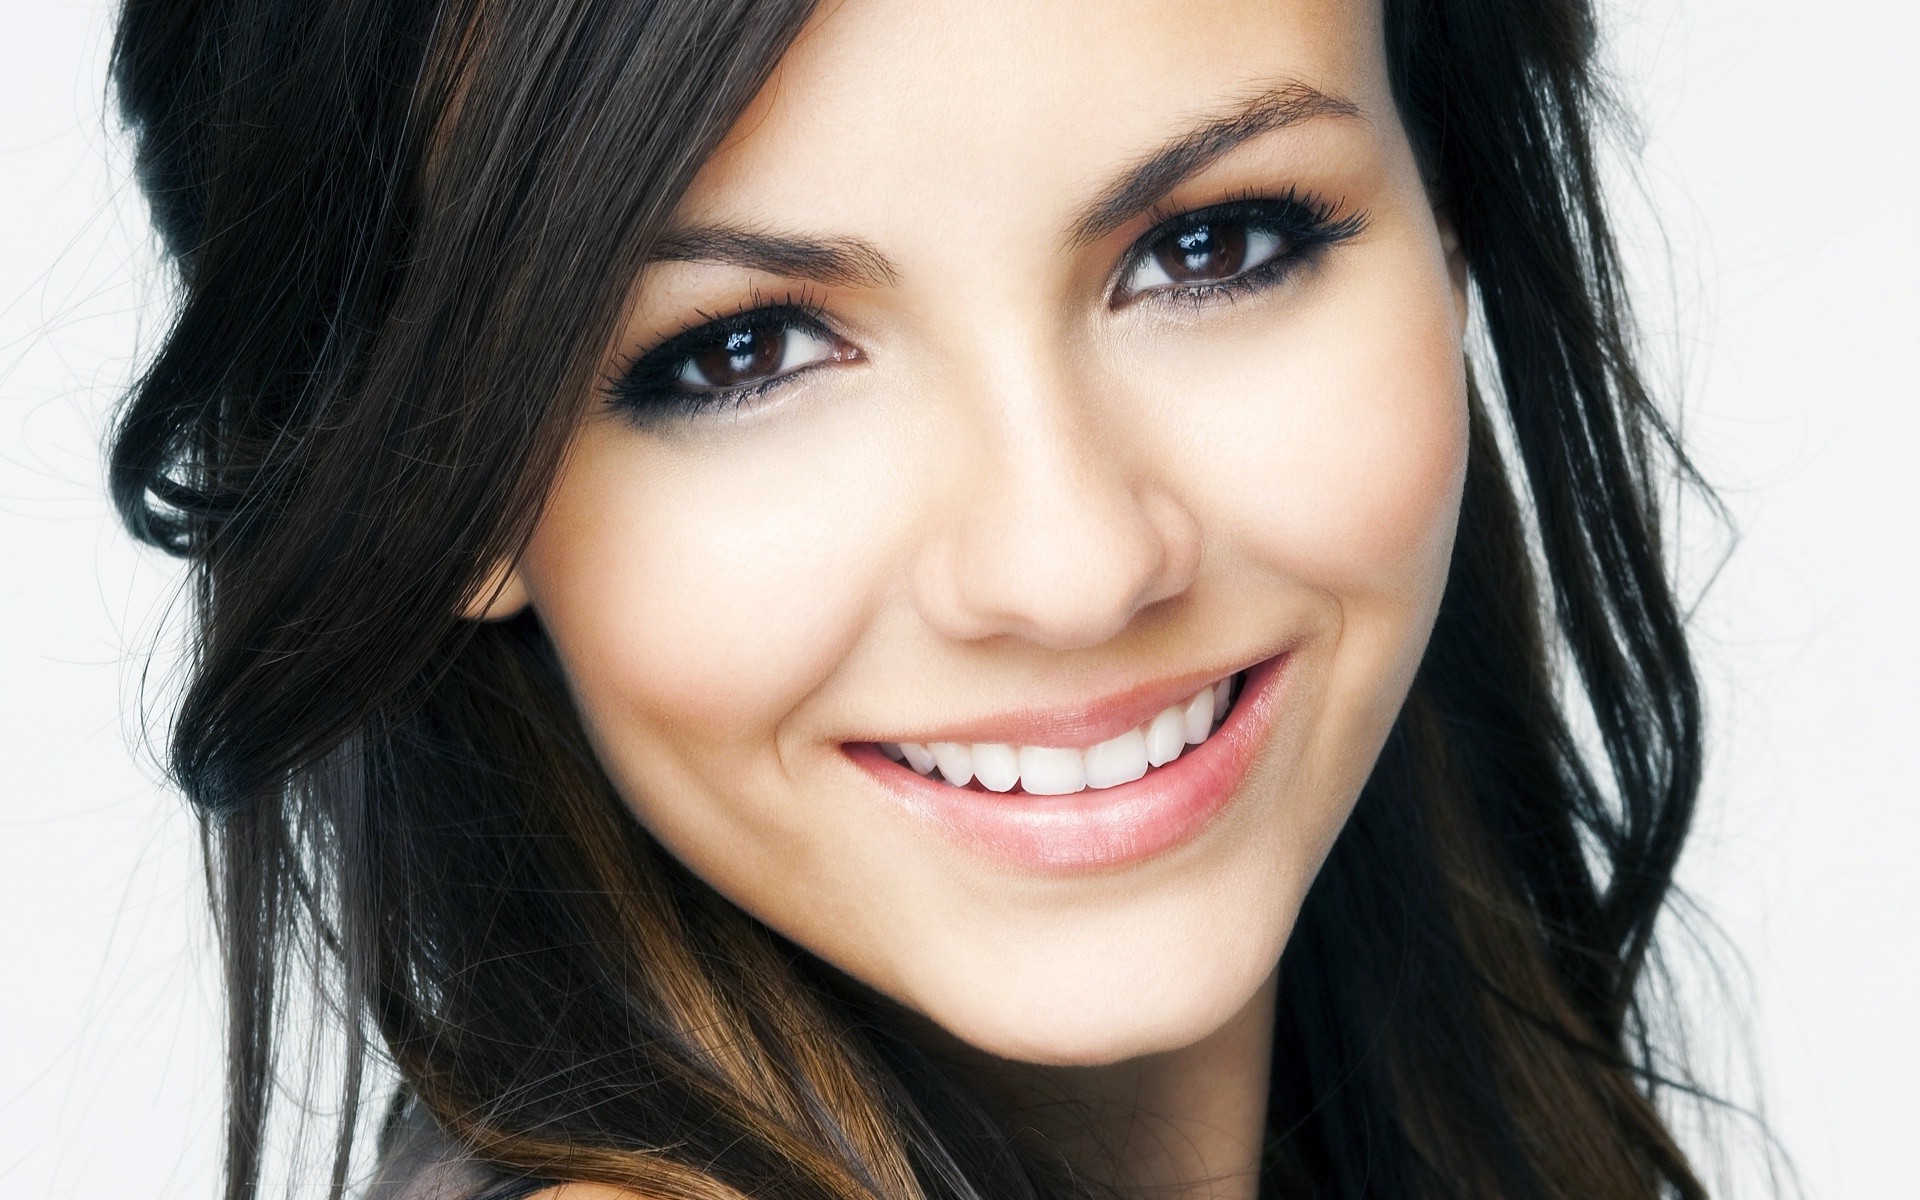 1000+ images about victoria justice on Pinterest | Victoria